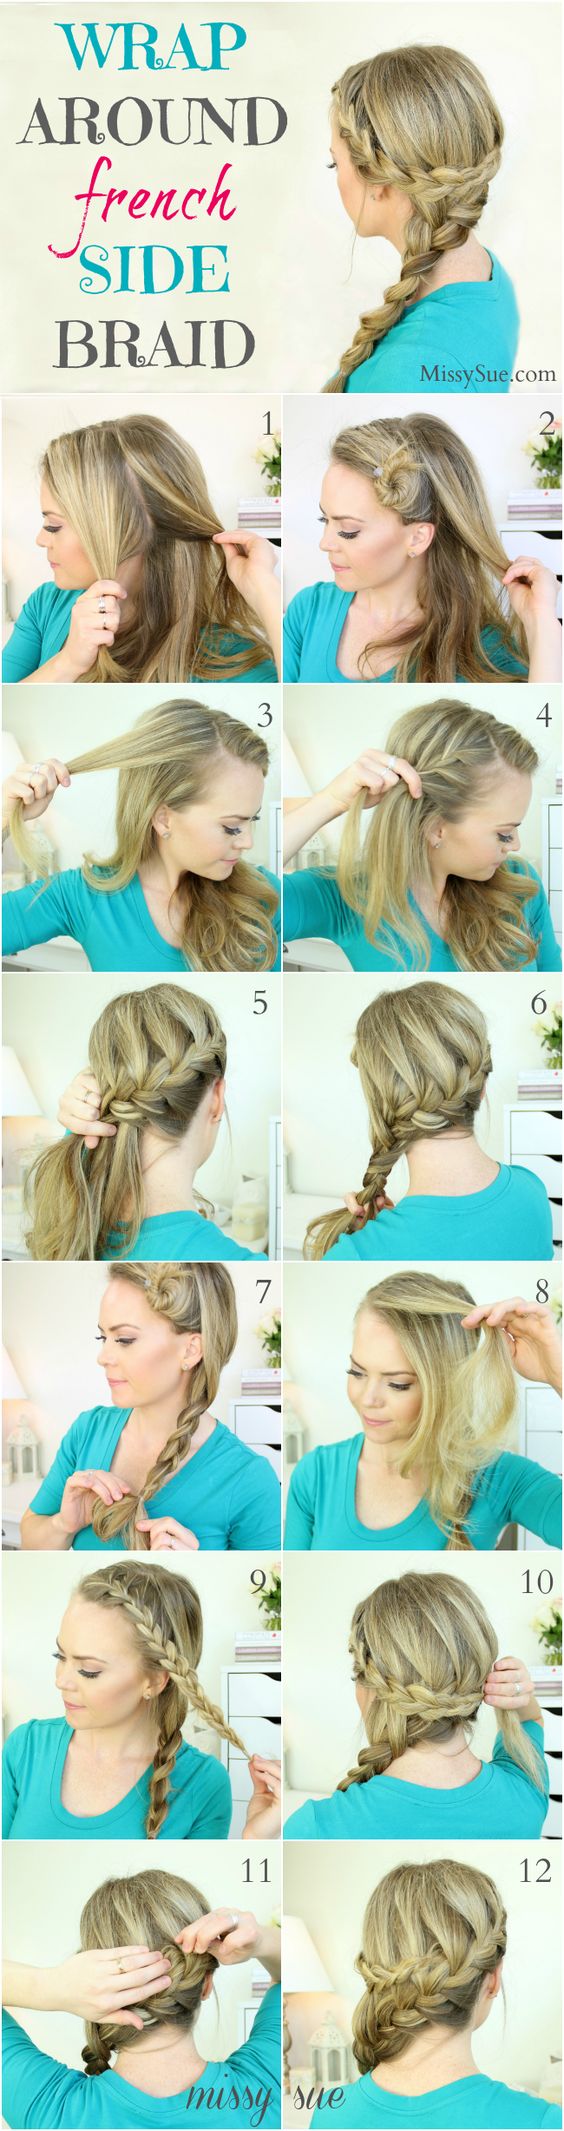 Wrapping the French side braid